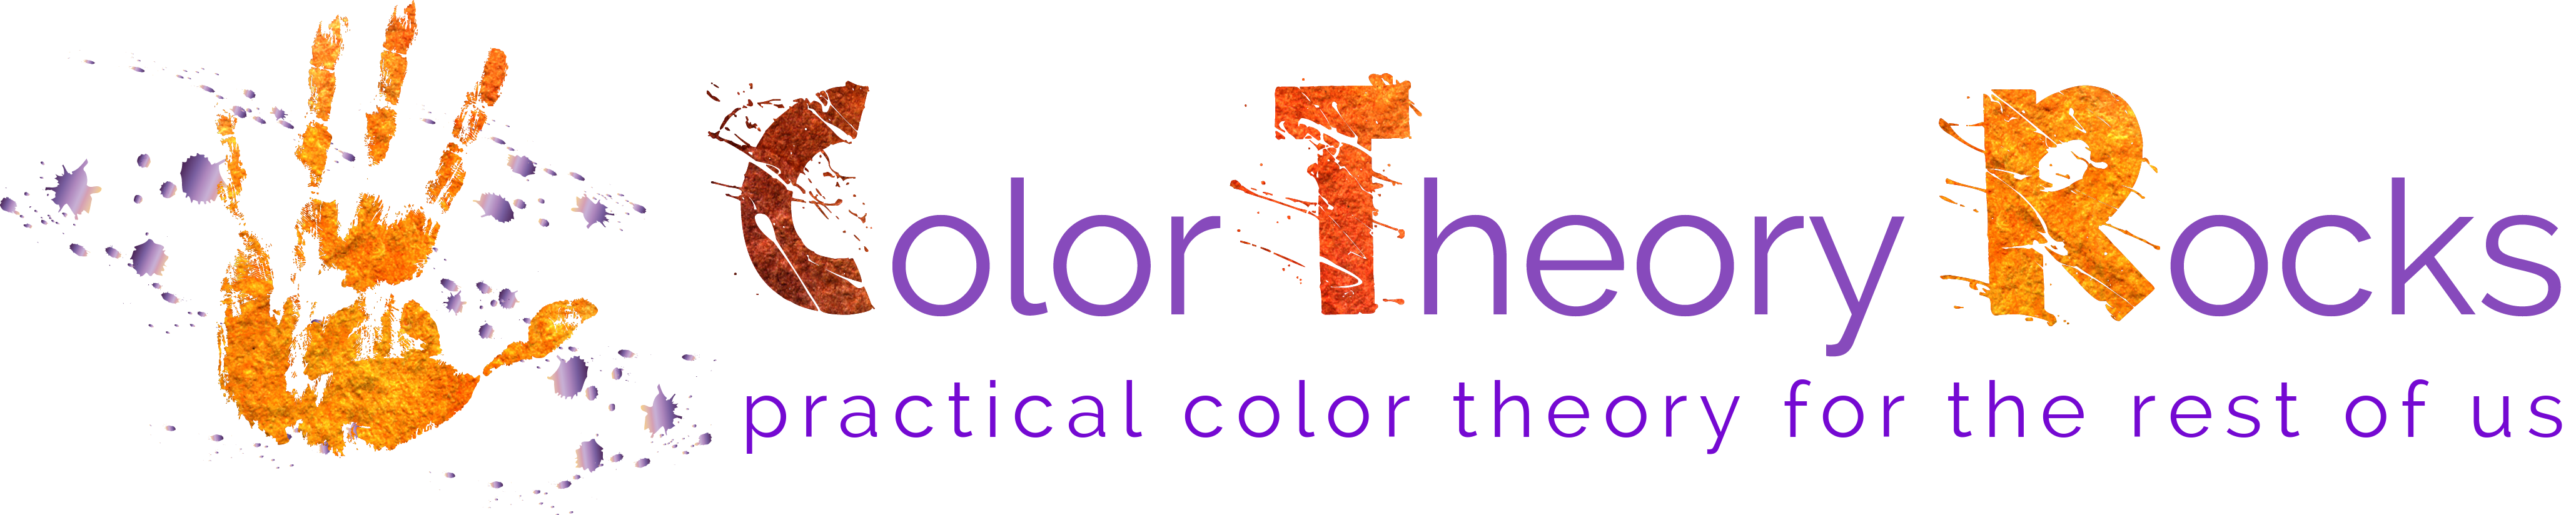 newsletter-images-color-theory-rocks